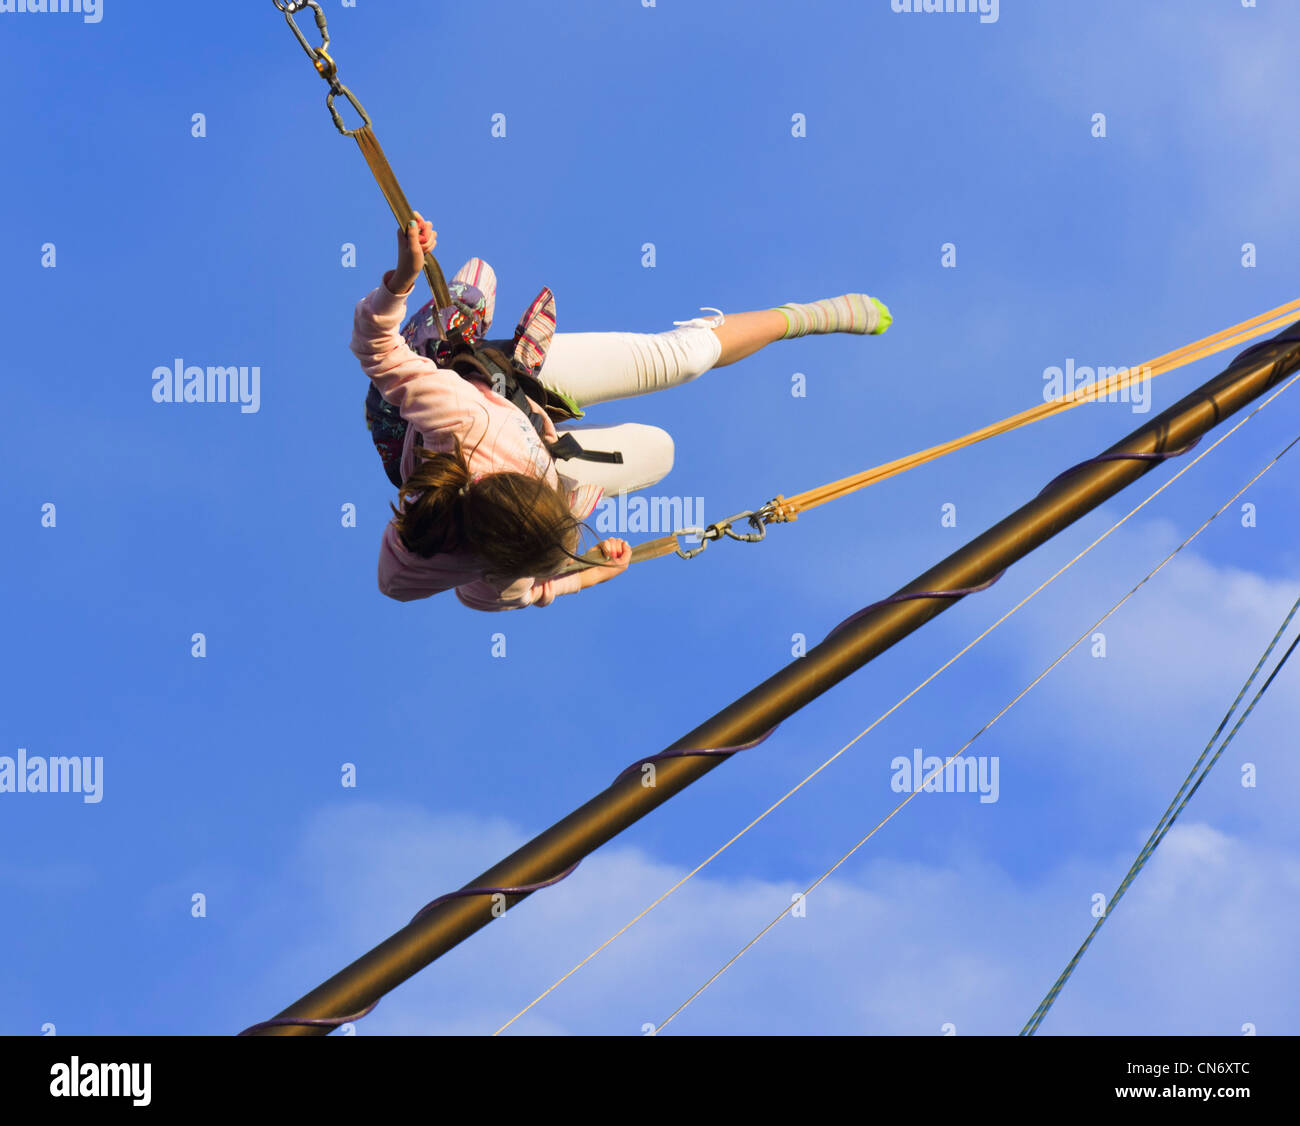 Lanzarote, Canary Islands - bungee bouncer for kids, Costa Teguise main square. Stock Photo